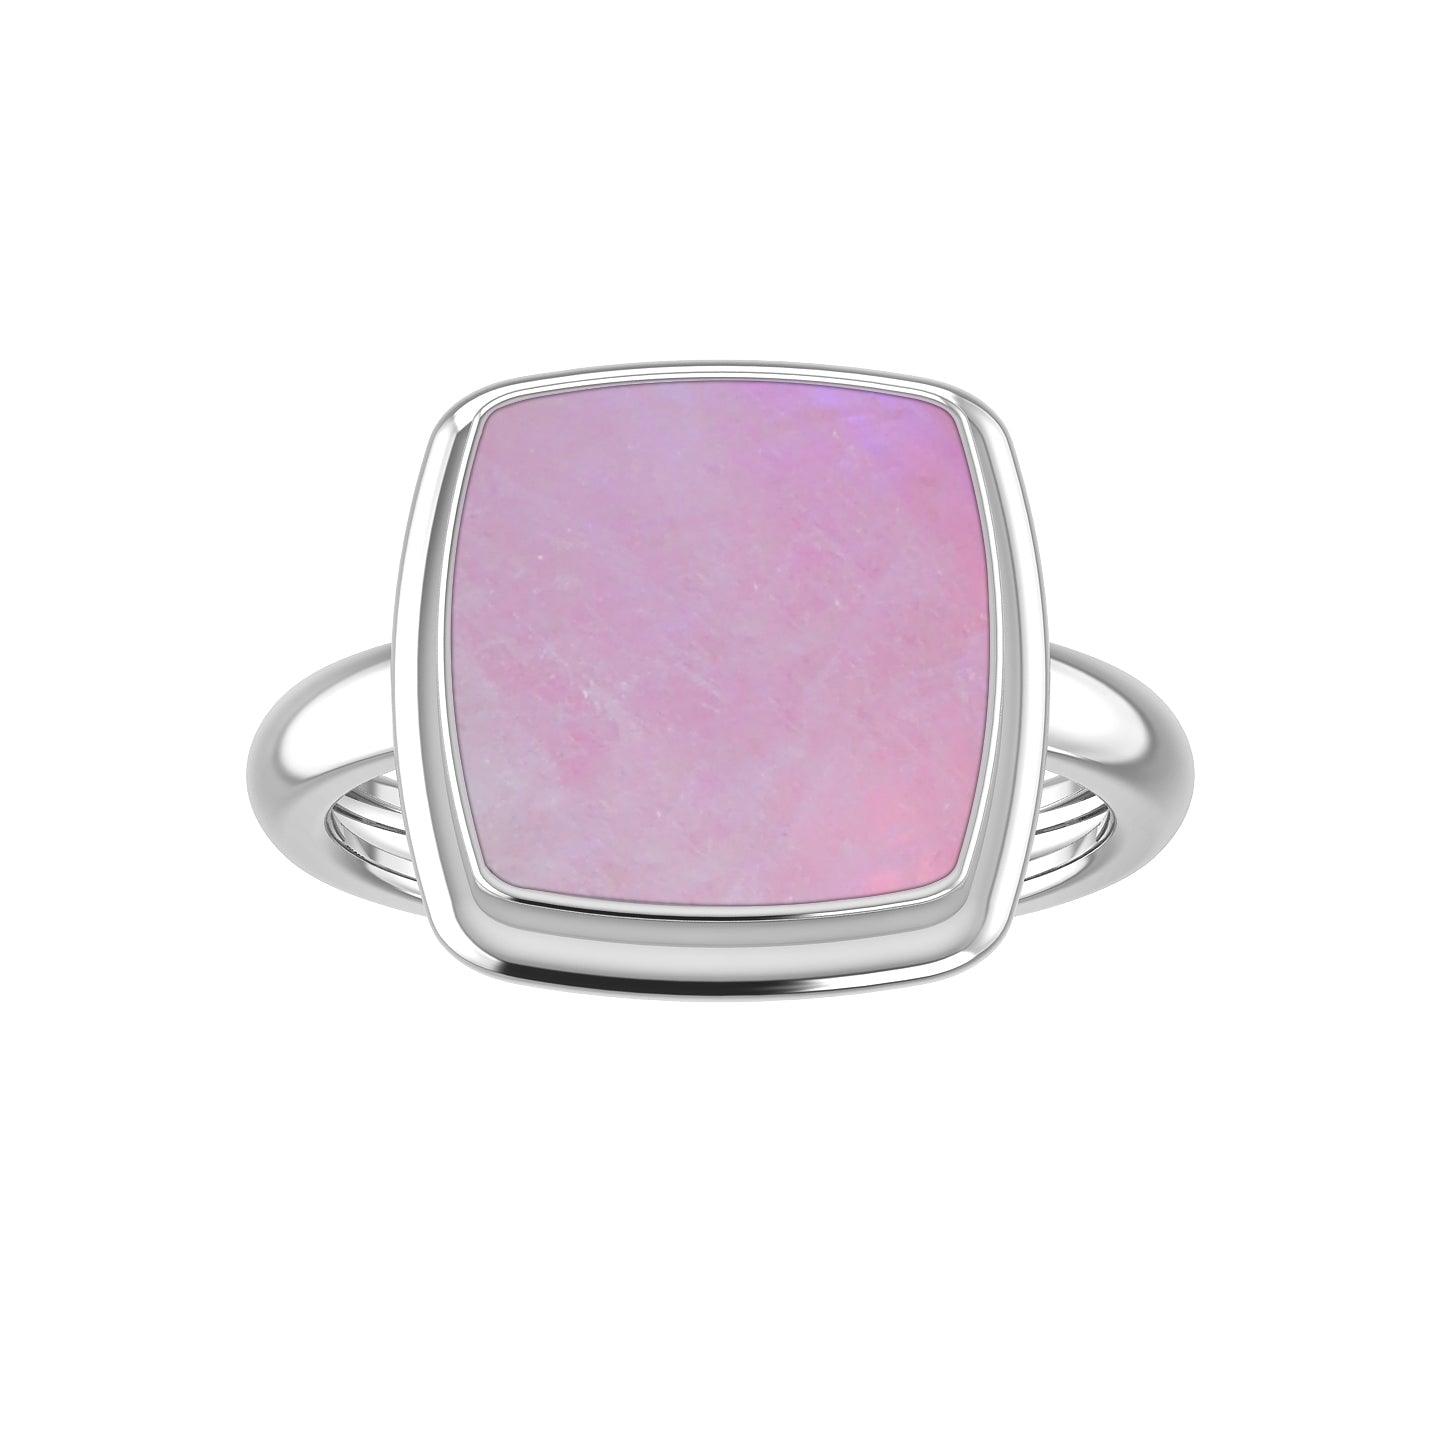 Natural Pink Moonstone Ring 925 Sterling Silver Bezel Set Handmade Jewelry Pack of 6 (Box 4)